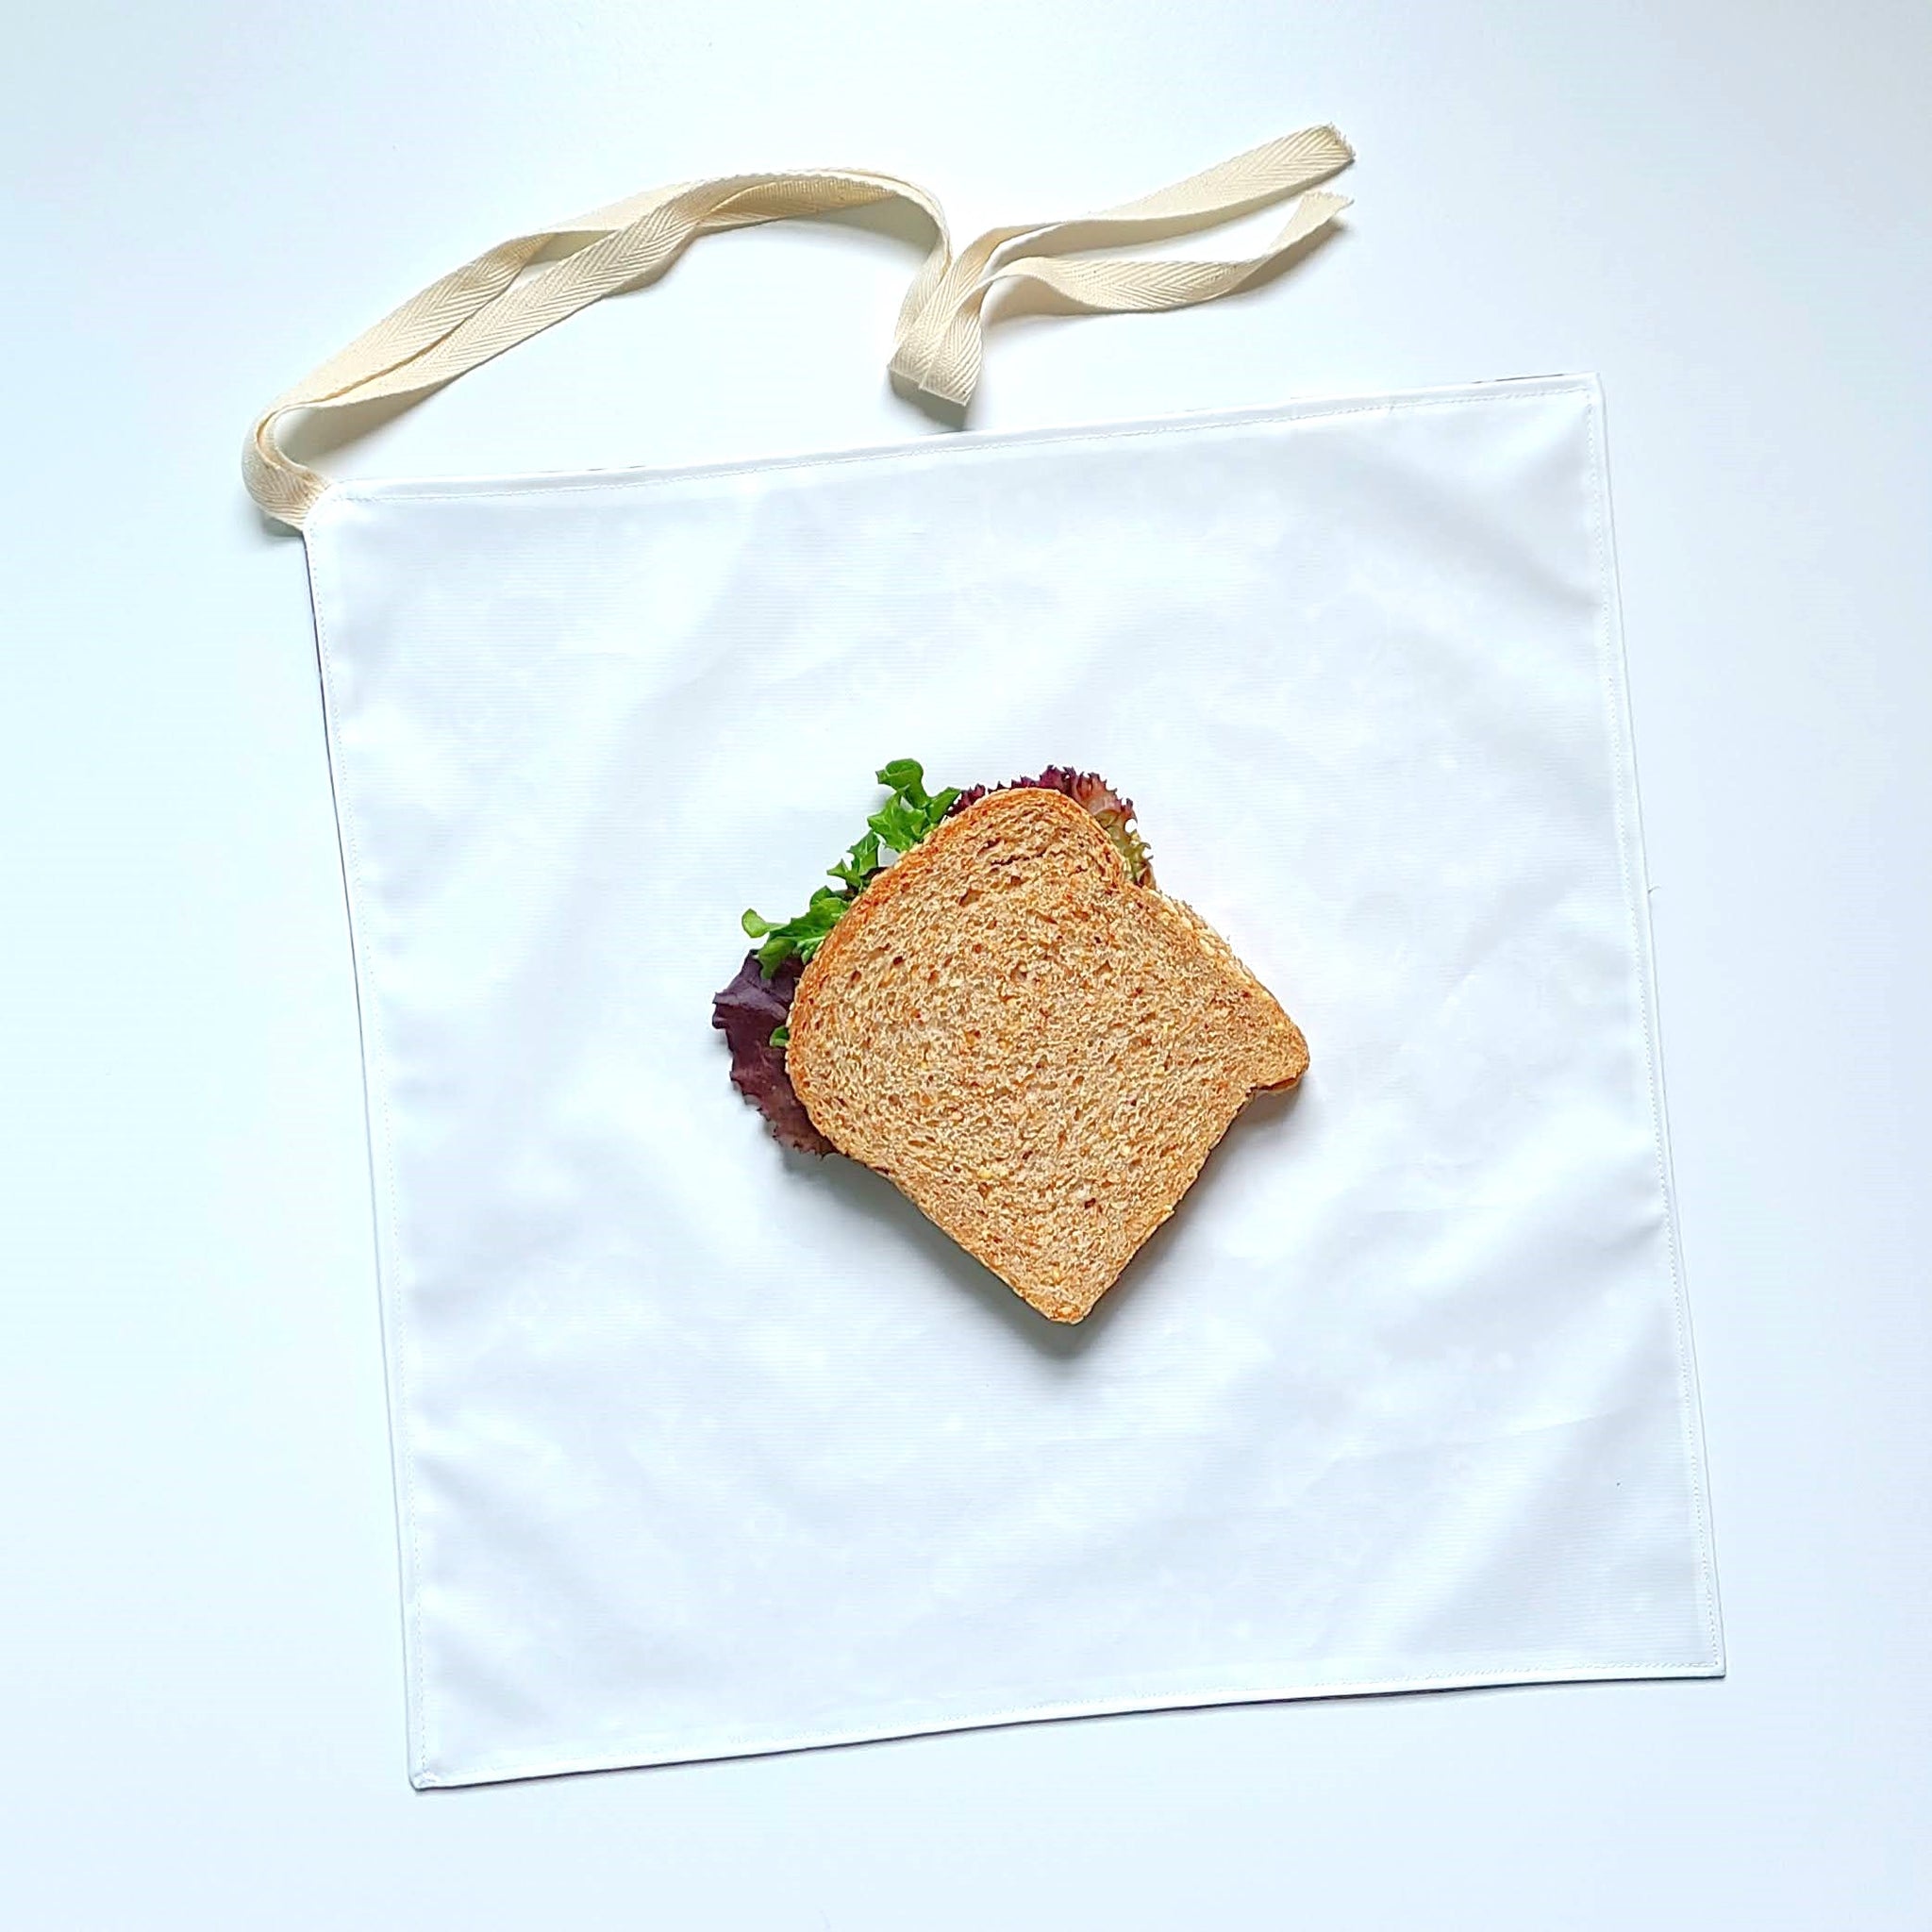 Reusable sandwich wrap ~ By Boc 'N' Roll – UnSealed, Clacton-on-Sea